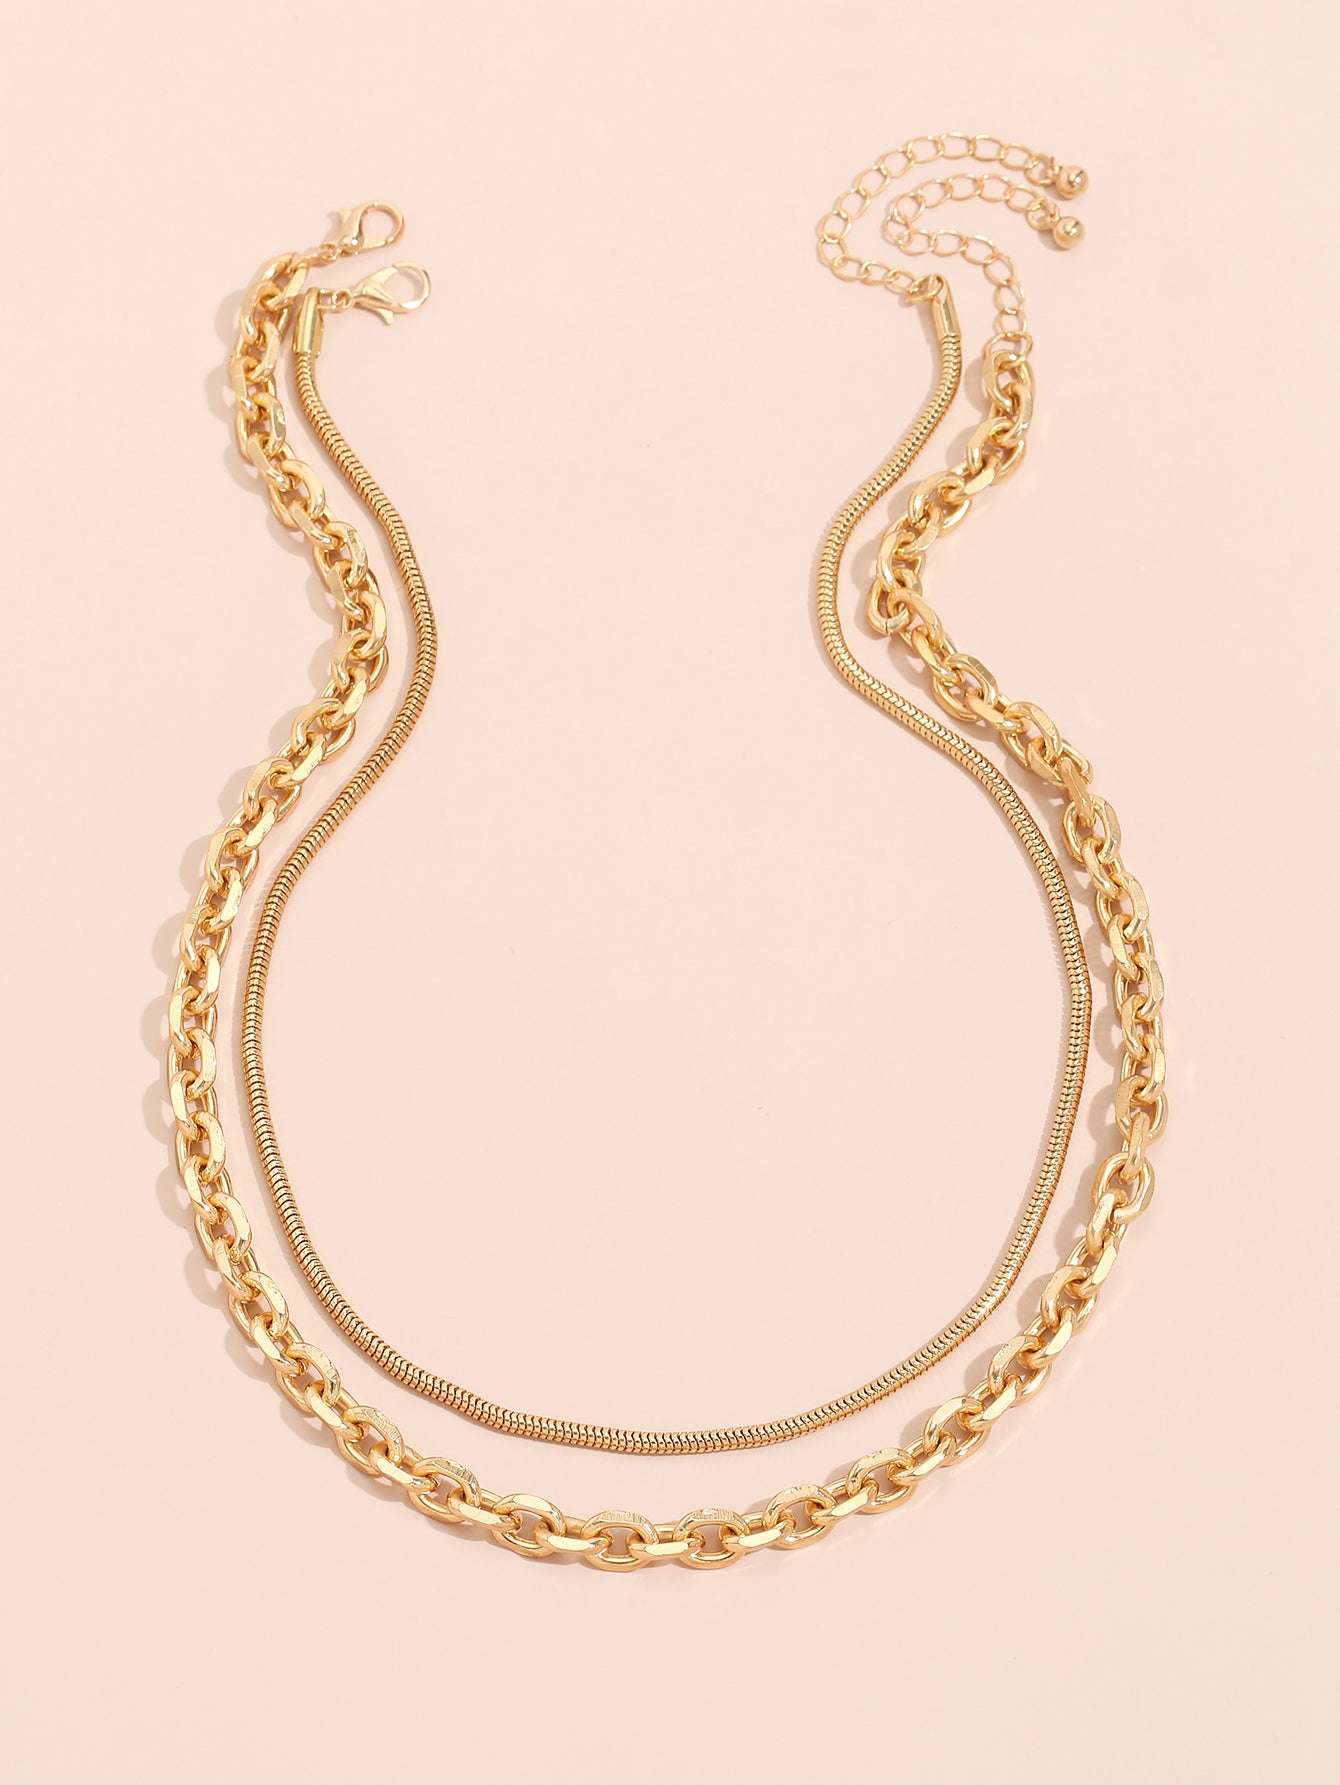 Clavicle Chain, Exquisite, Personality - available at Sparq Mart